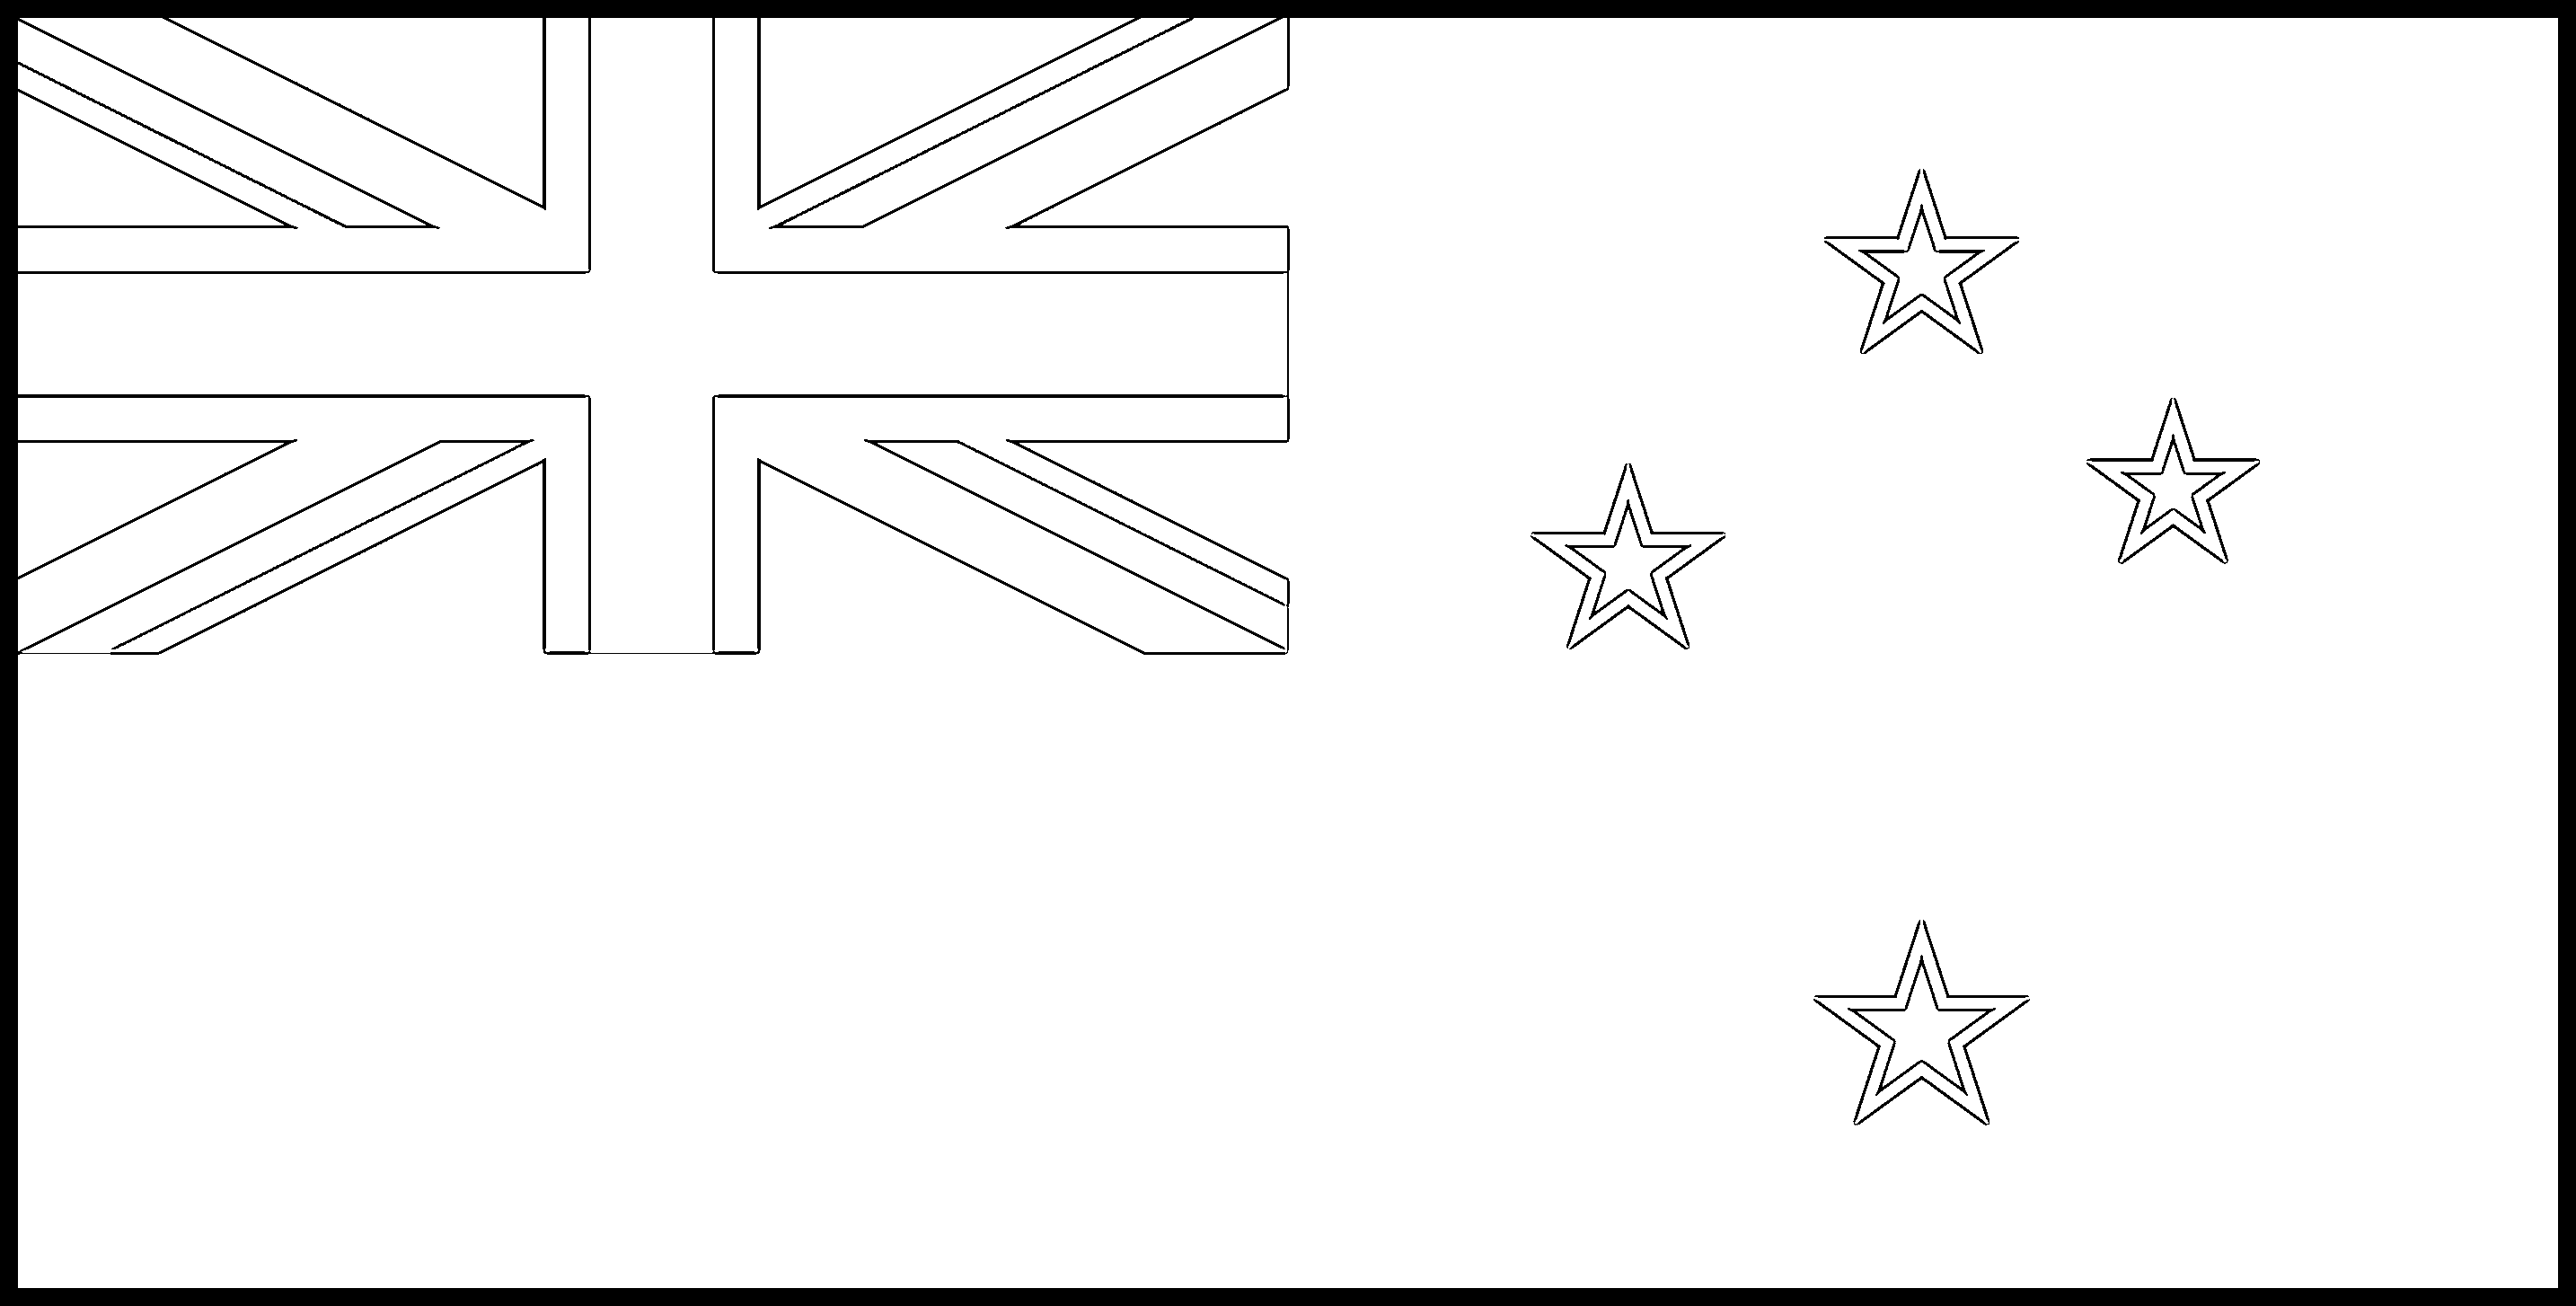 New zealand flag colouring page â flags web